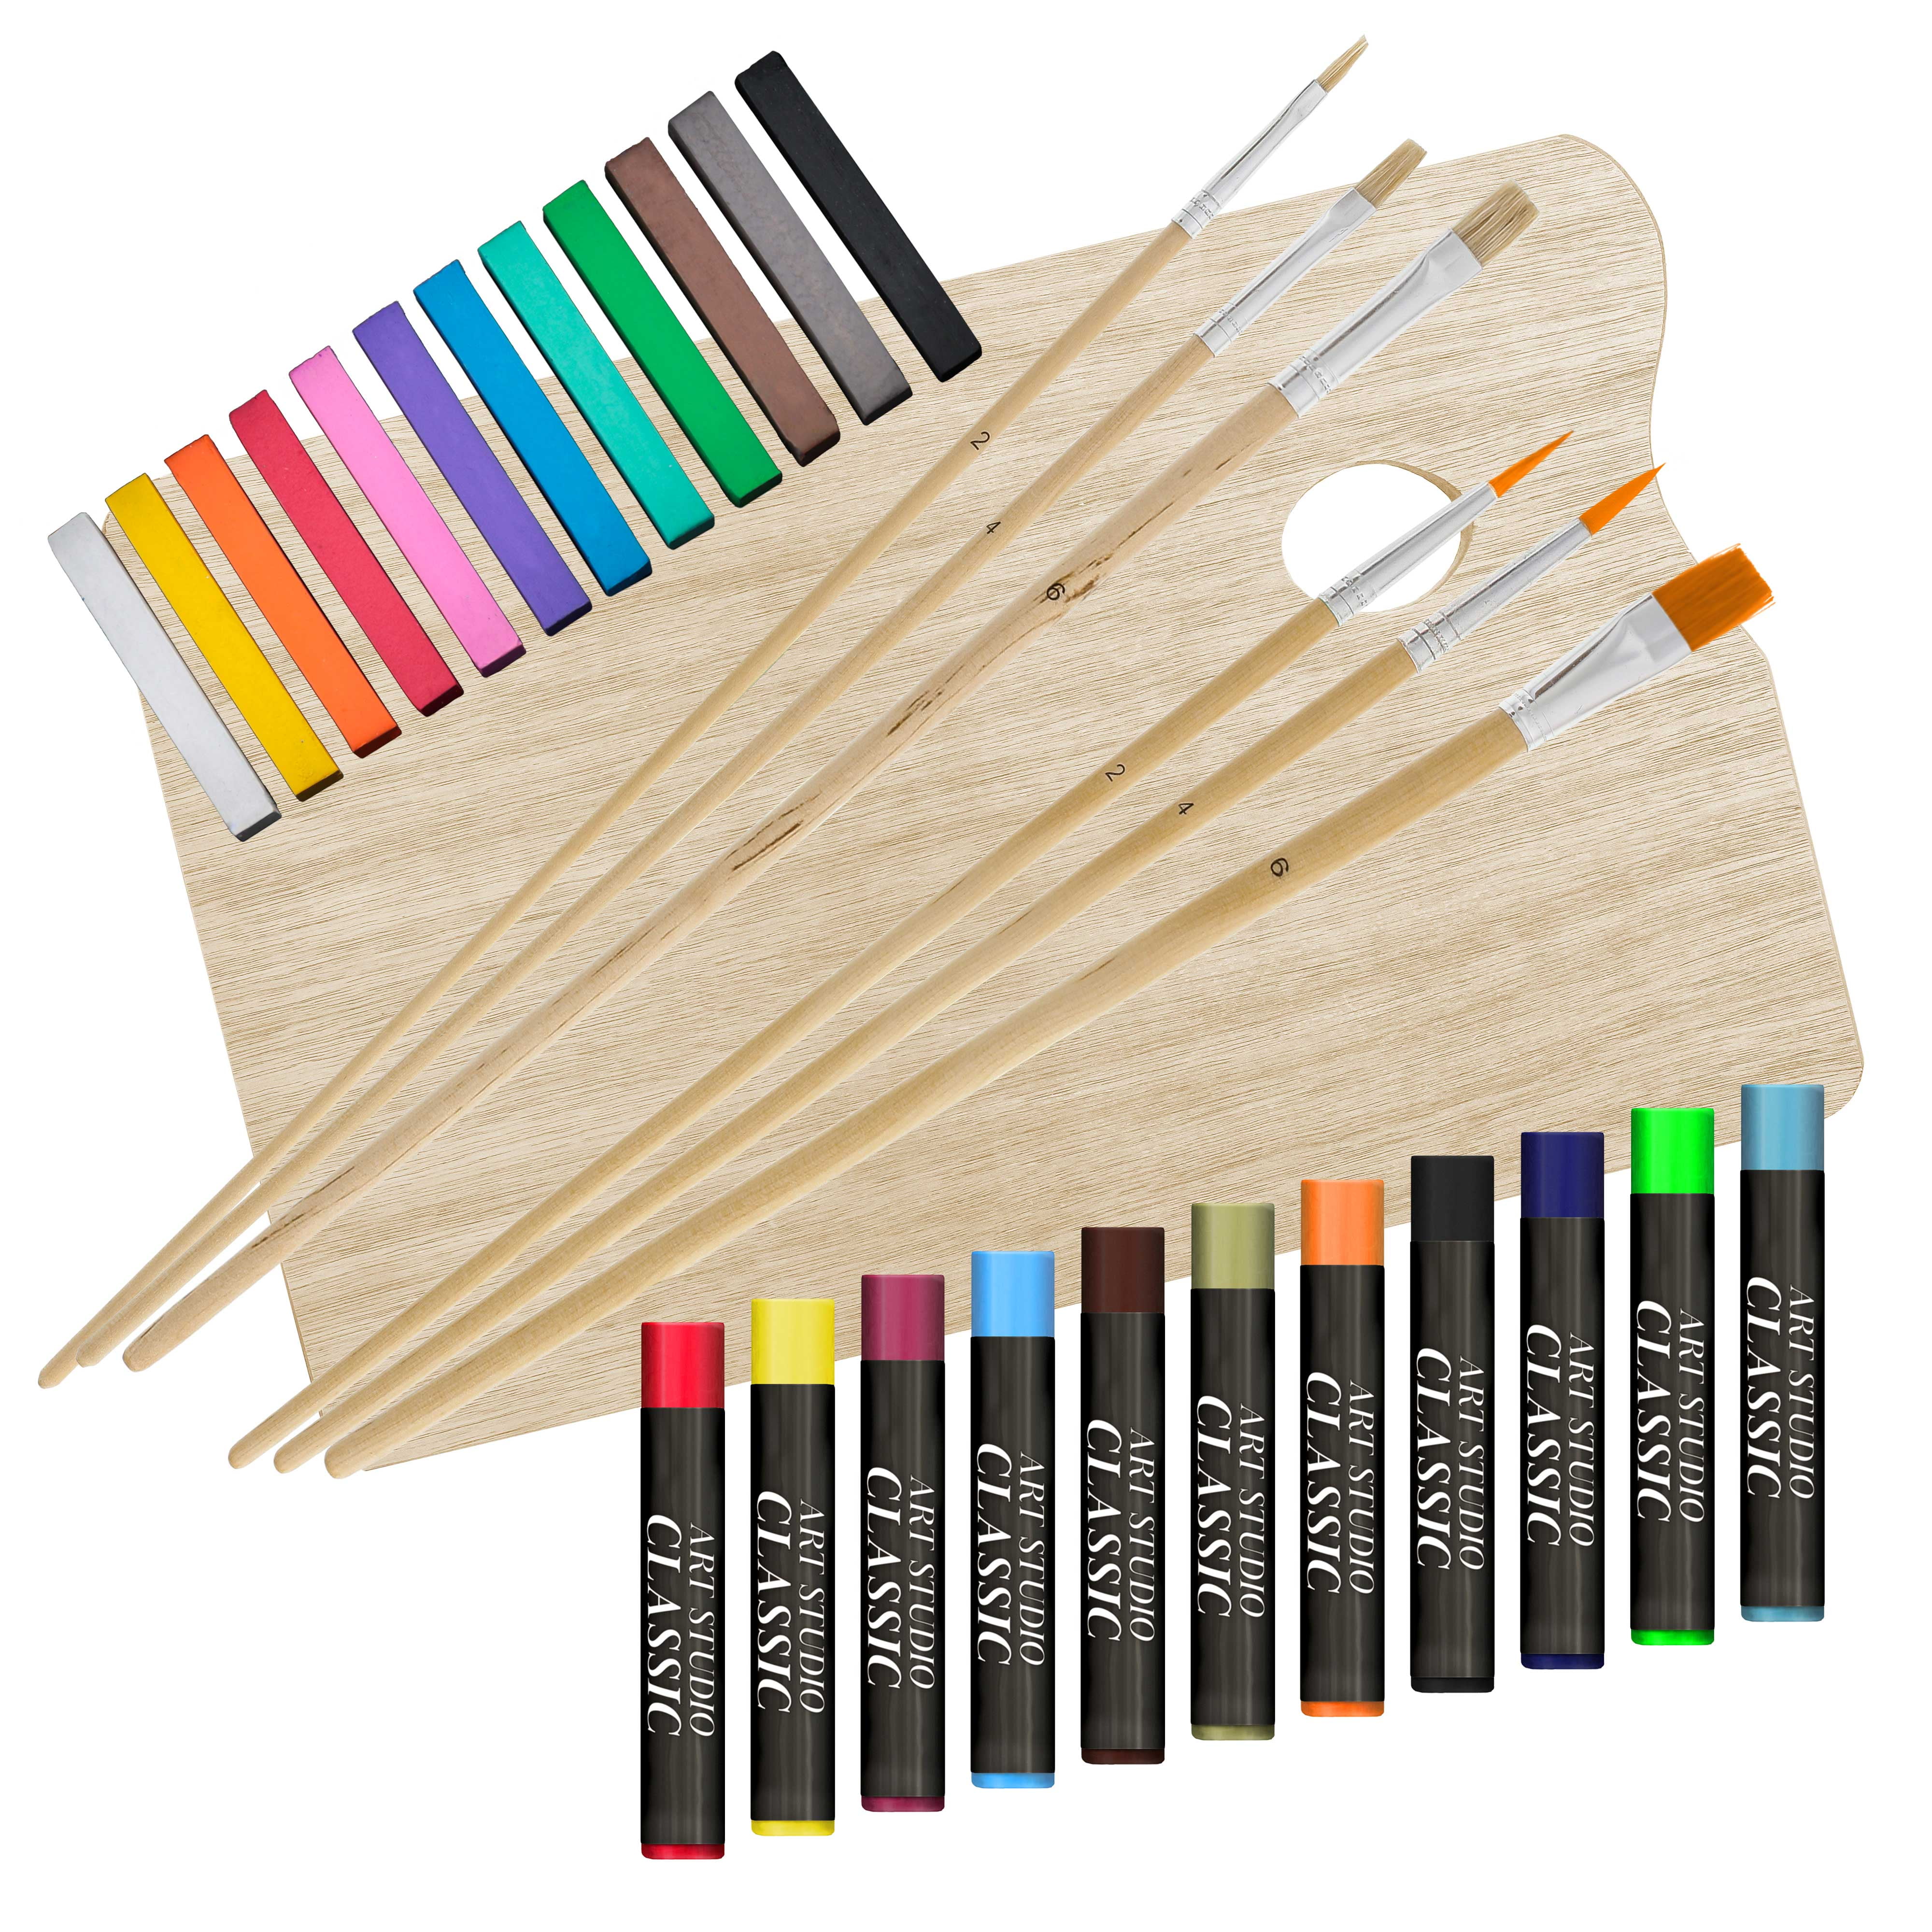 US Art Supply 13-Piece Artist Painting Set with 6 Vivid Oil Paint Colors,  12 Easel, 2 Canvas Panels, 3 Brushes, Wood Painting Palette - Fun Children